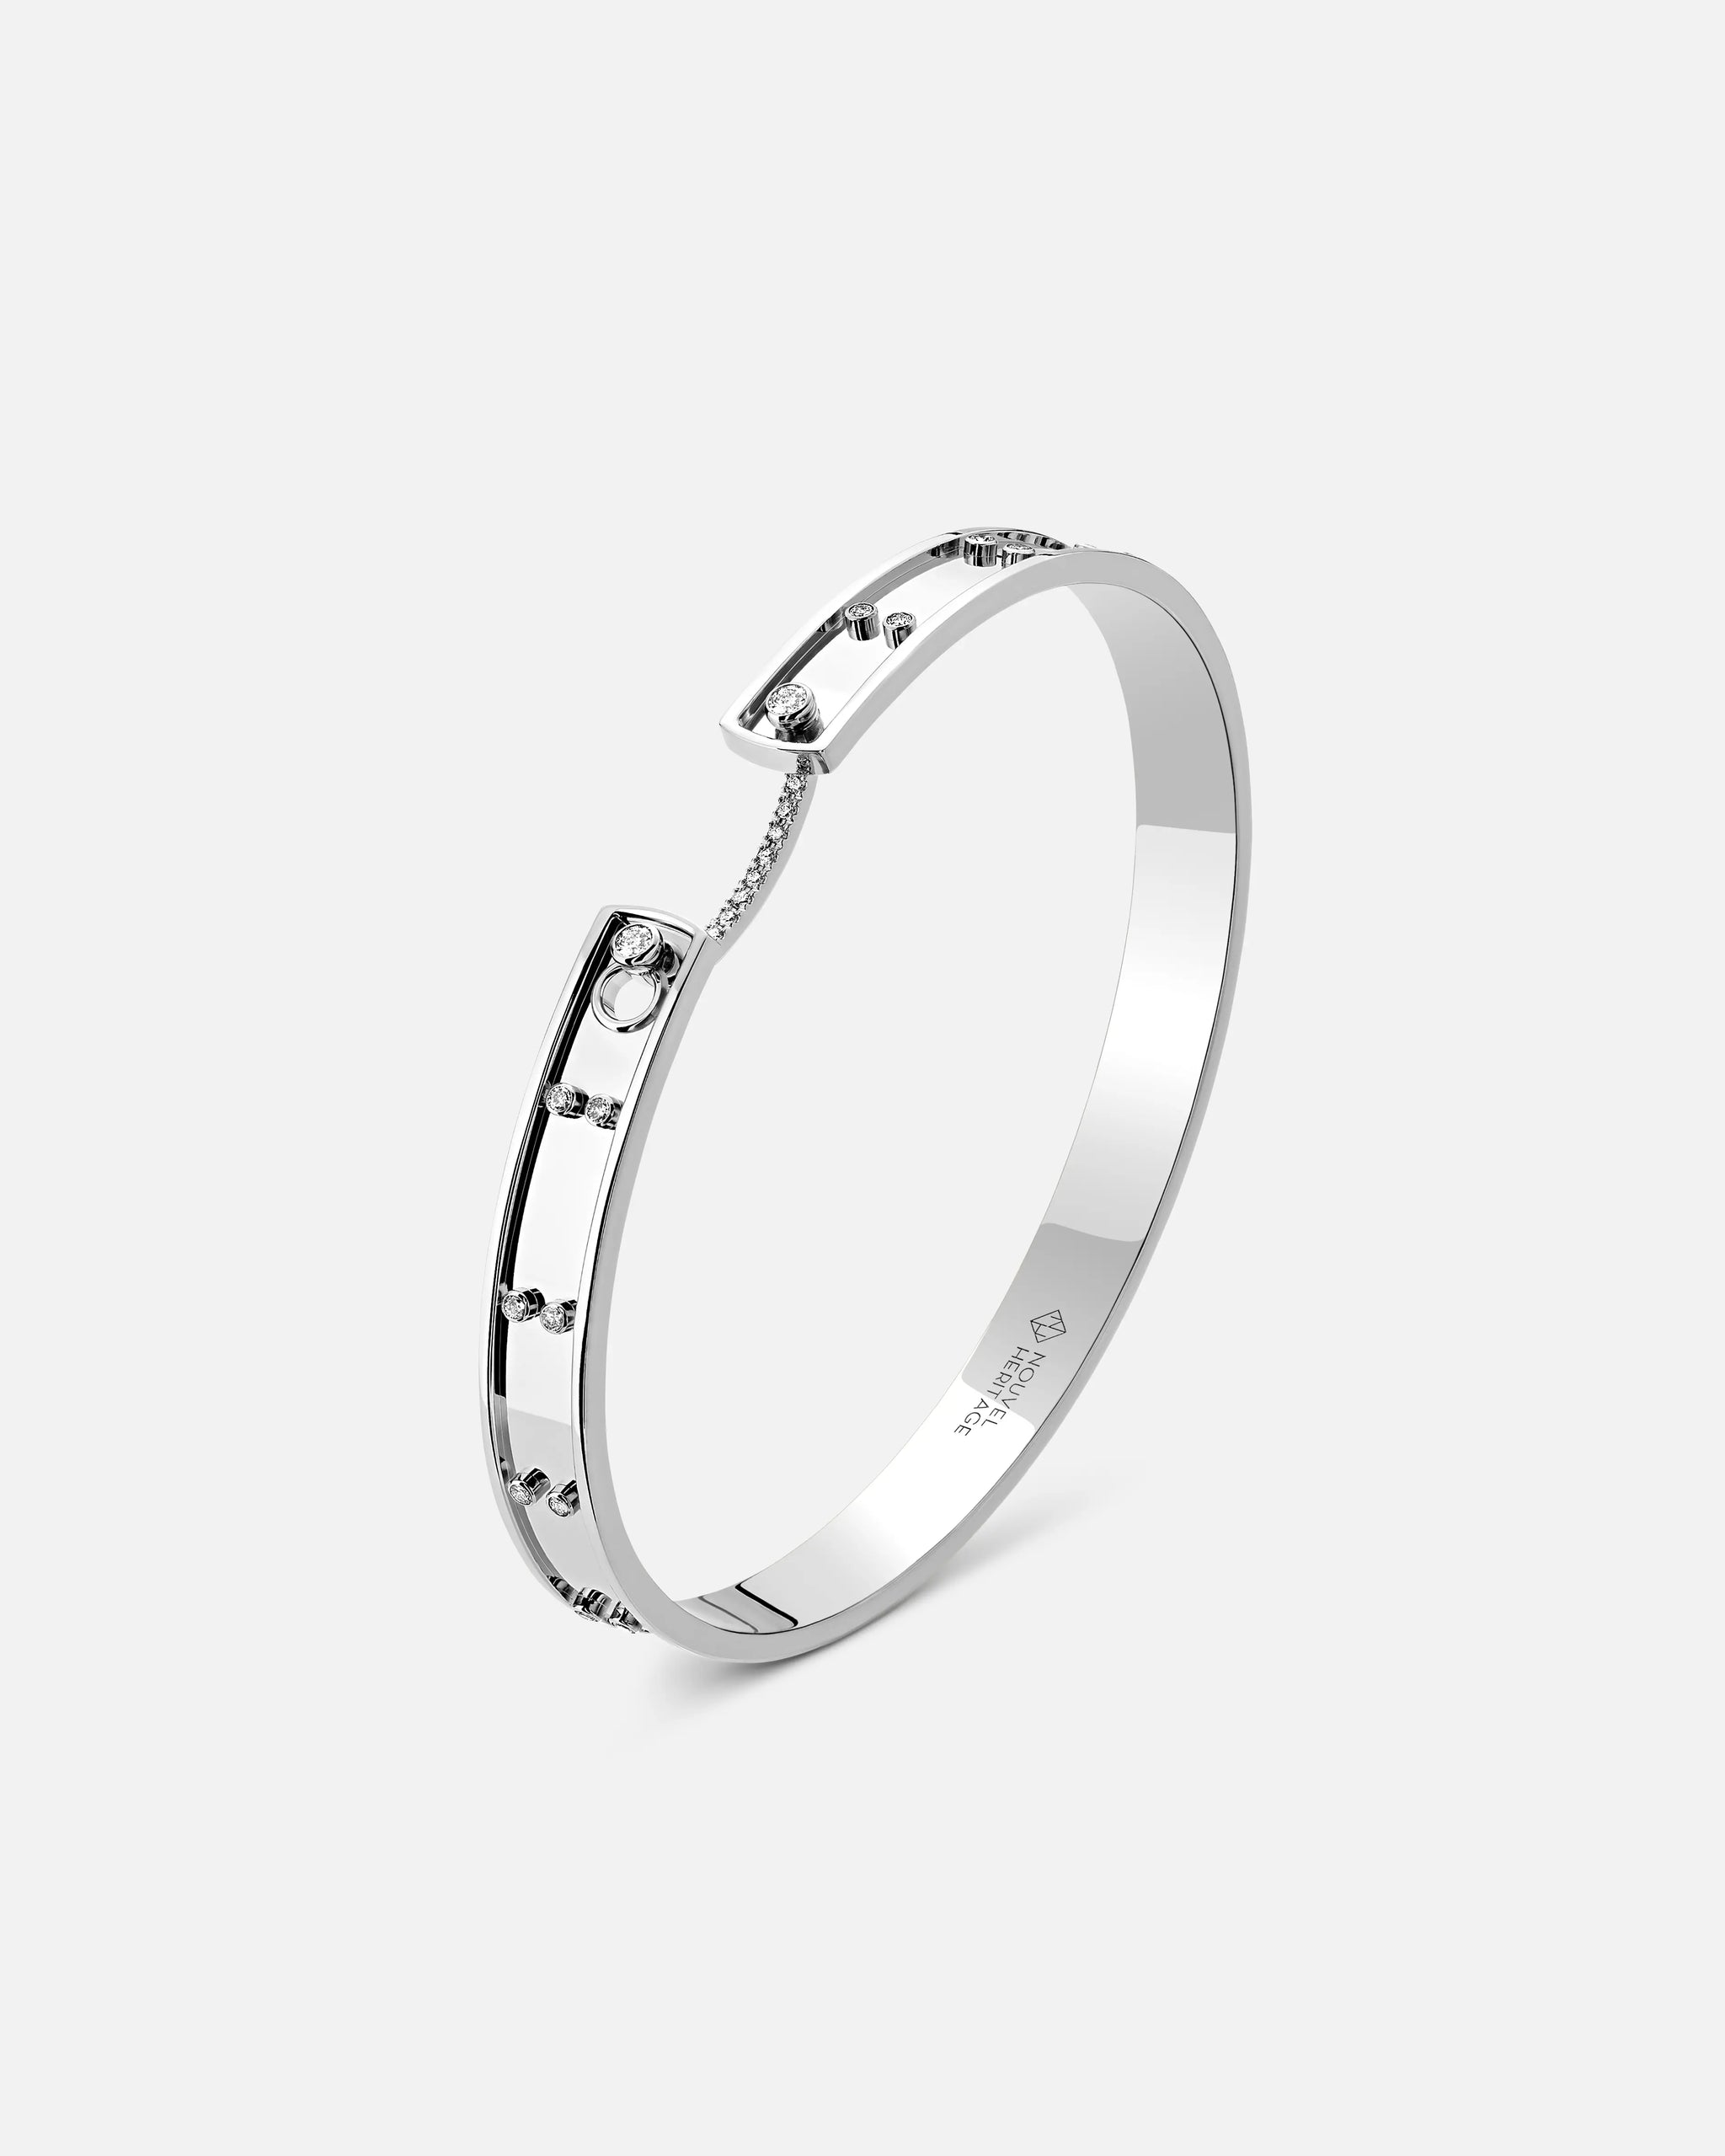 Picnic in Paris Mood Bangle in White Gold - 1 - Nouvel Heritage